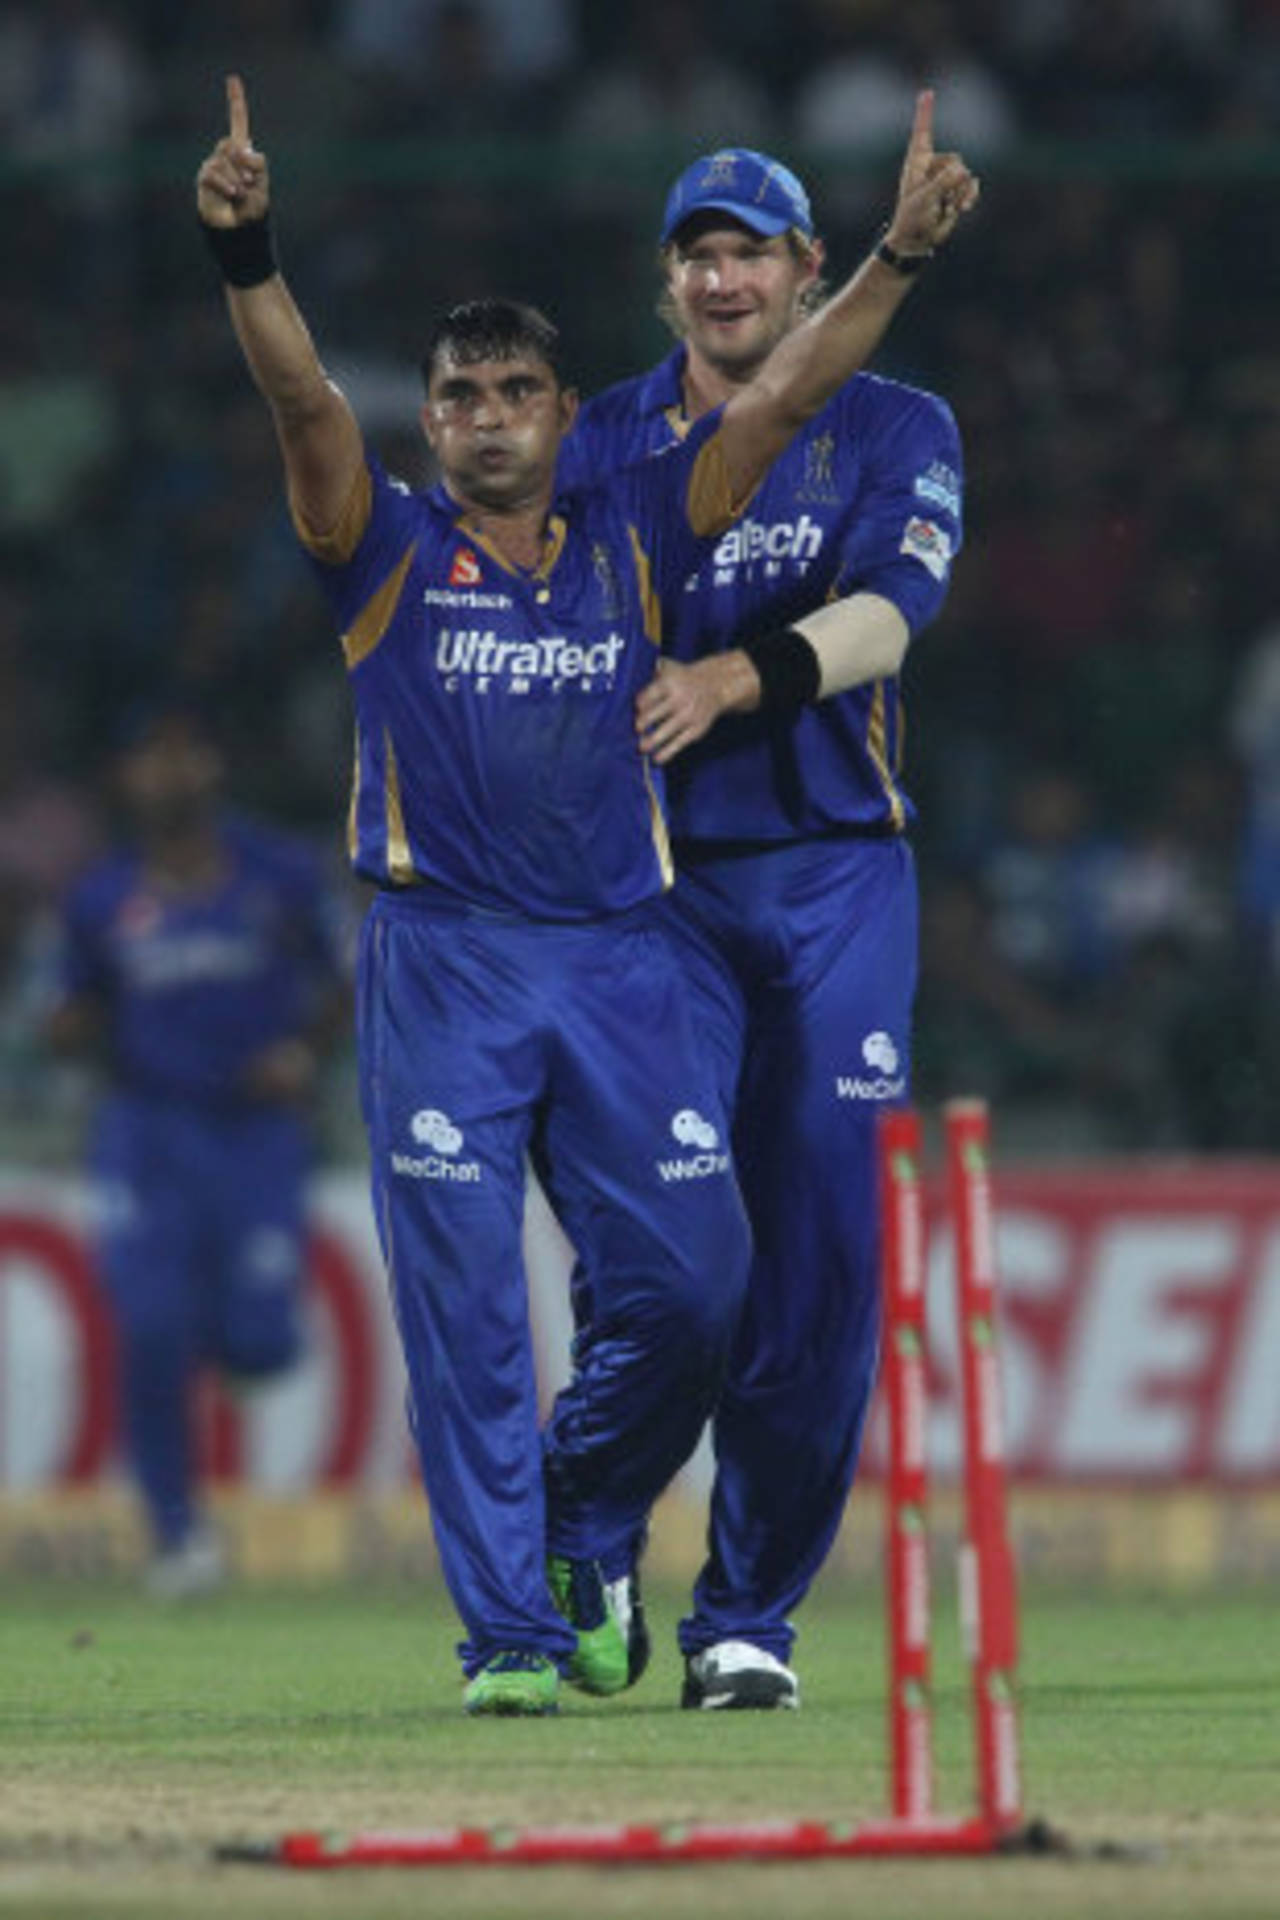 Pravin Tambe was one of the unknowns who played a headlining role for Royals, taking 12 wickets and conceding only 4.10 runs  an over&nbsp;&nbsp;&bull;&nbsp;&nbsp;BCCI